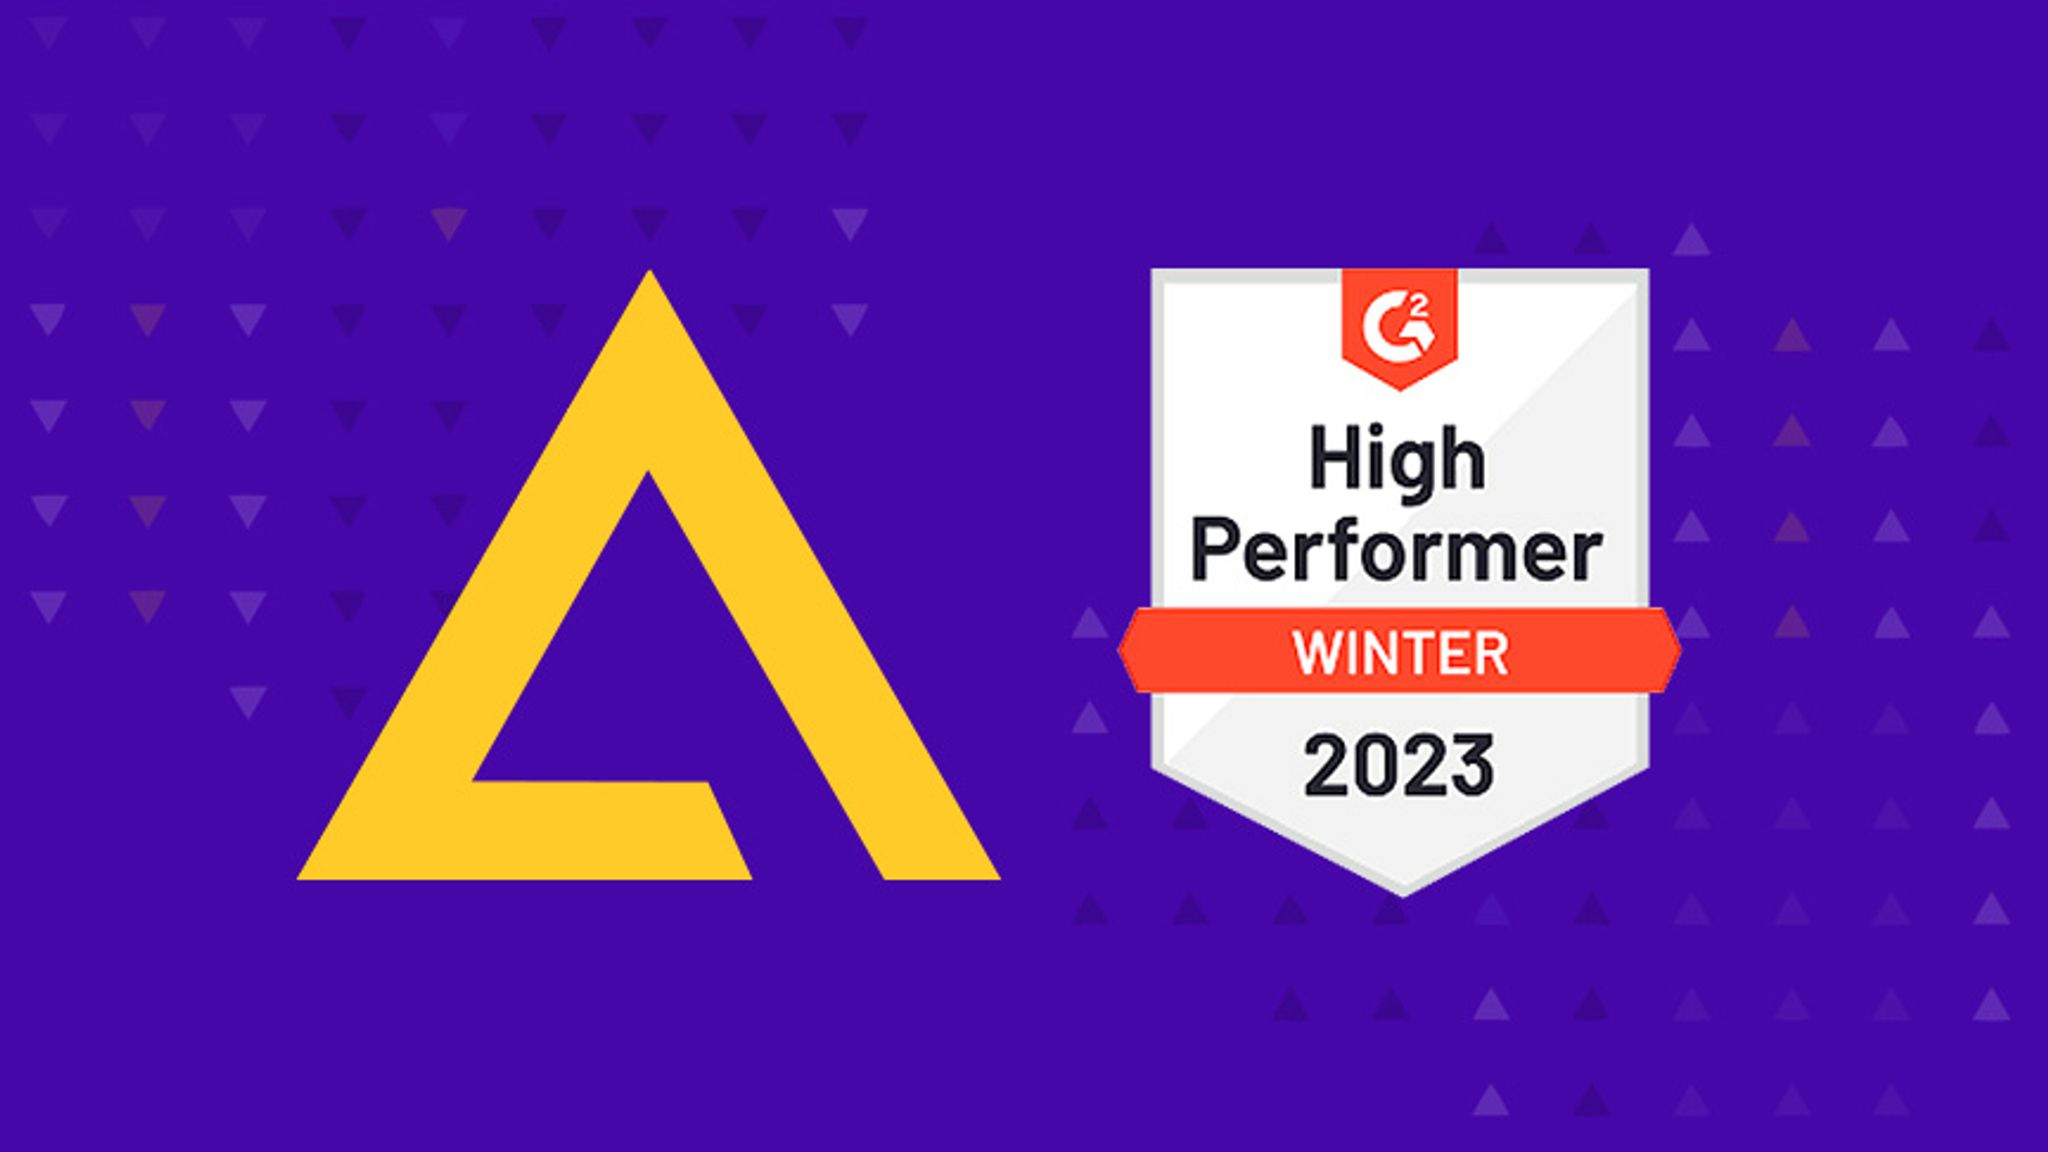 Agility CMS logo and G2 Winter 2023 High Performer badge